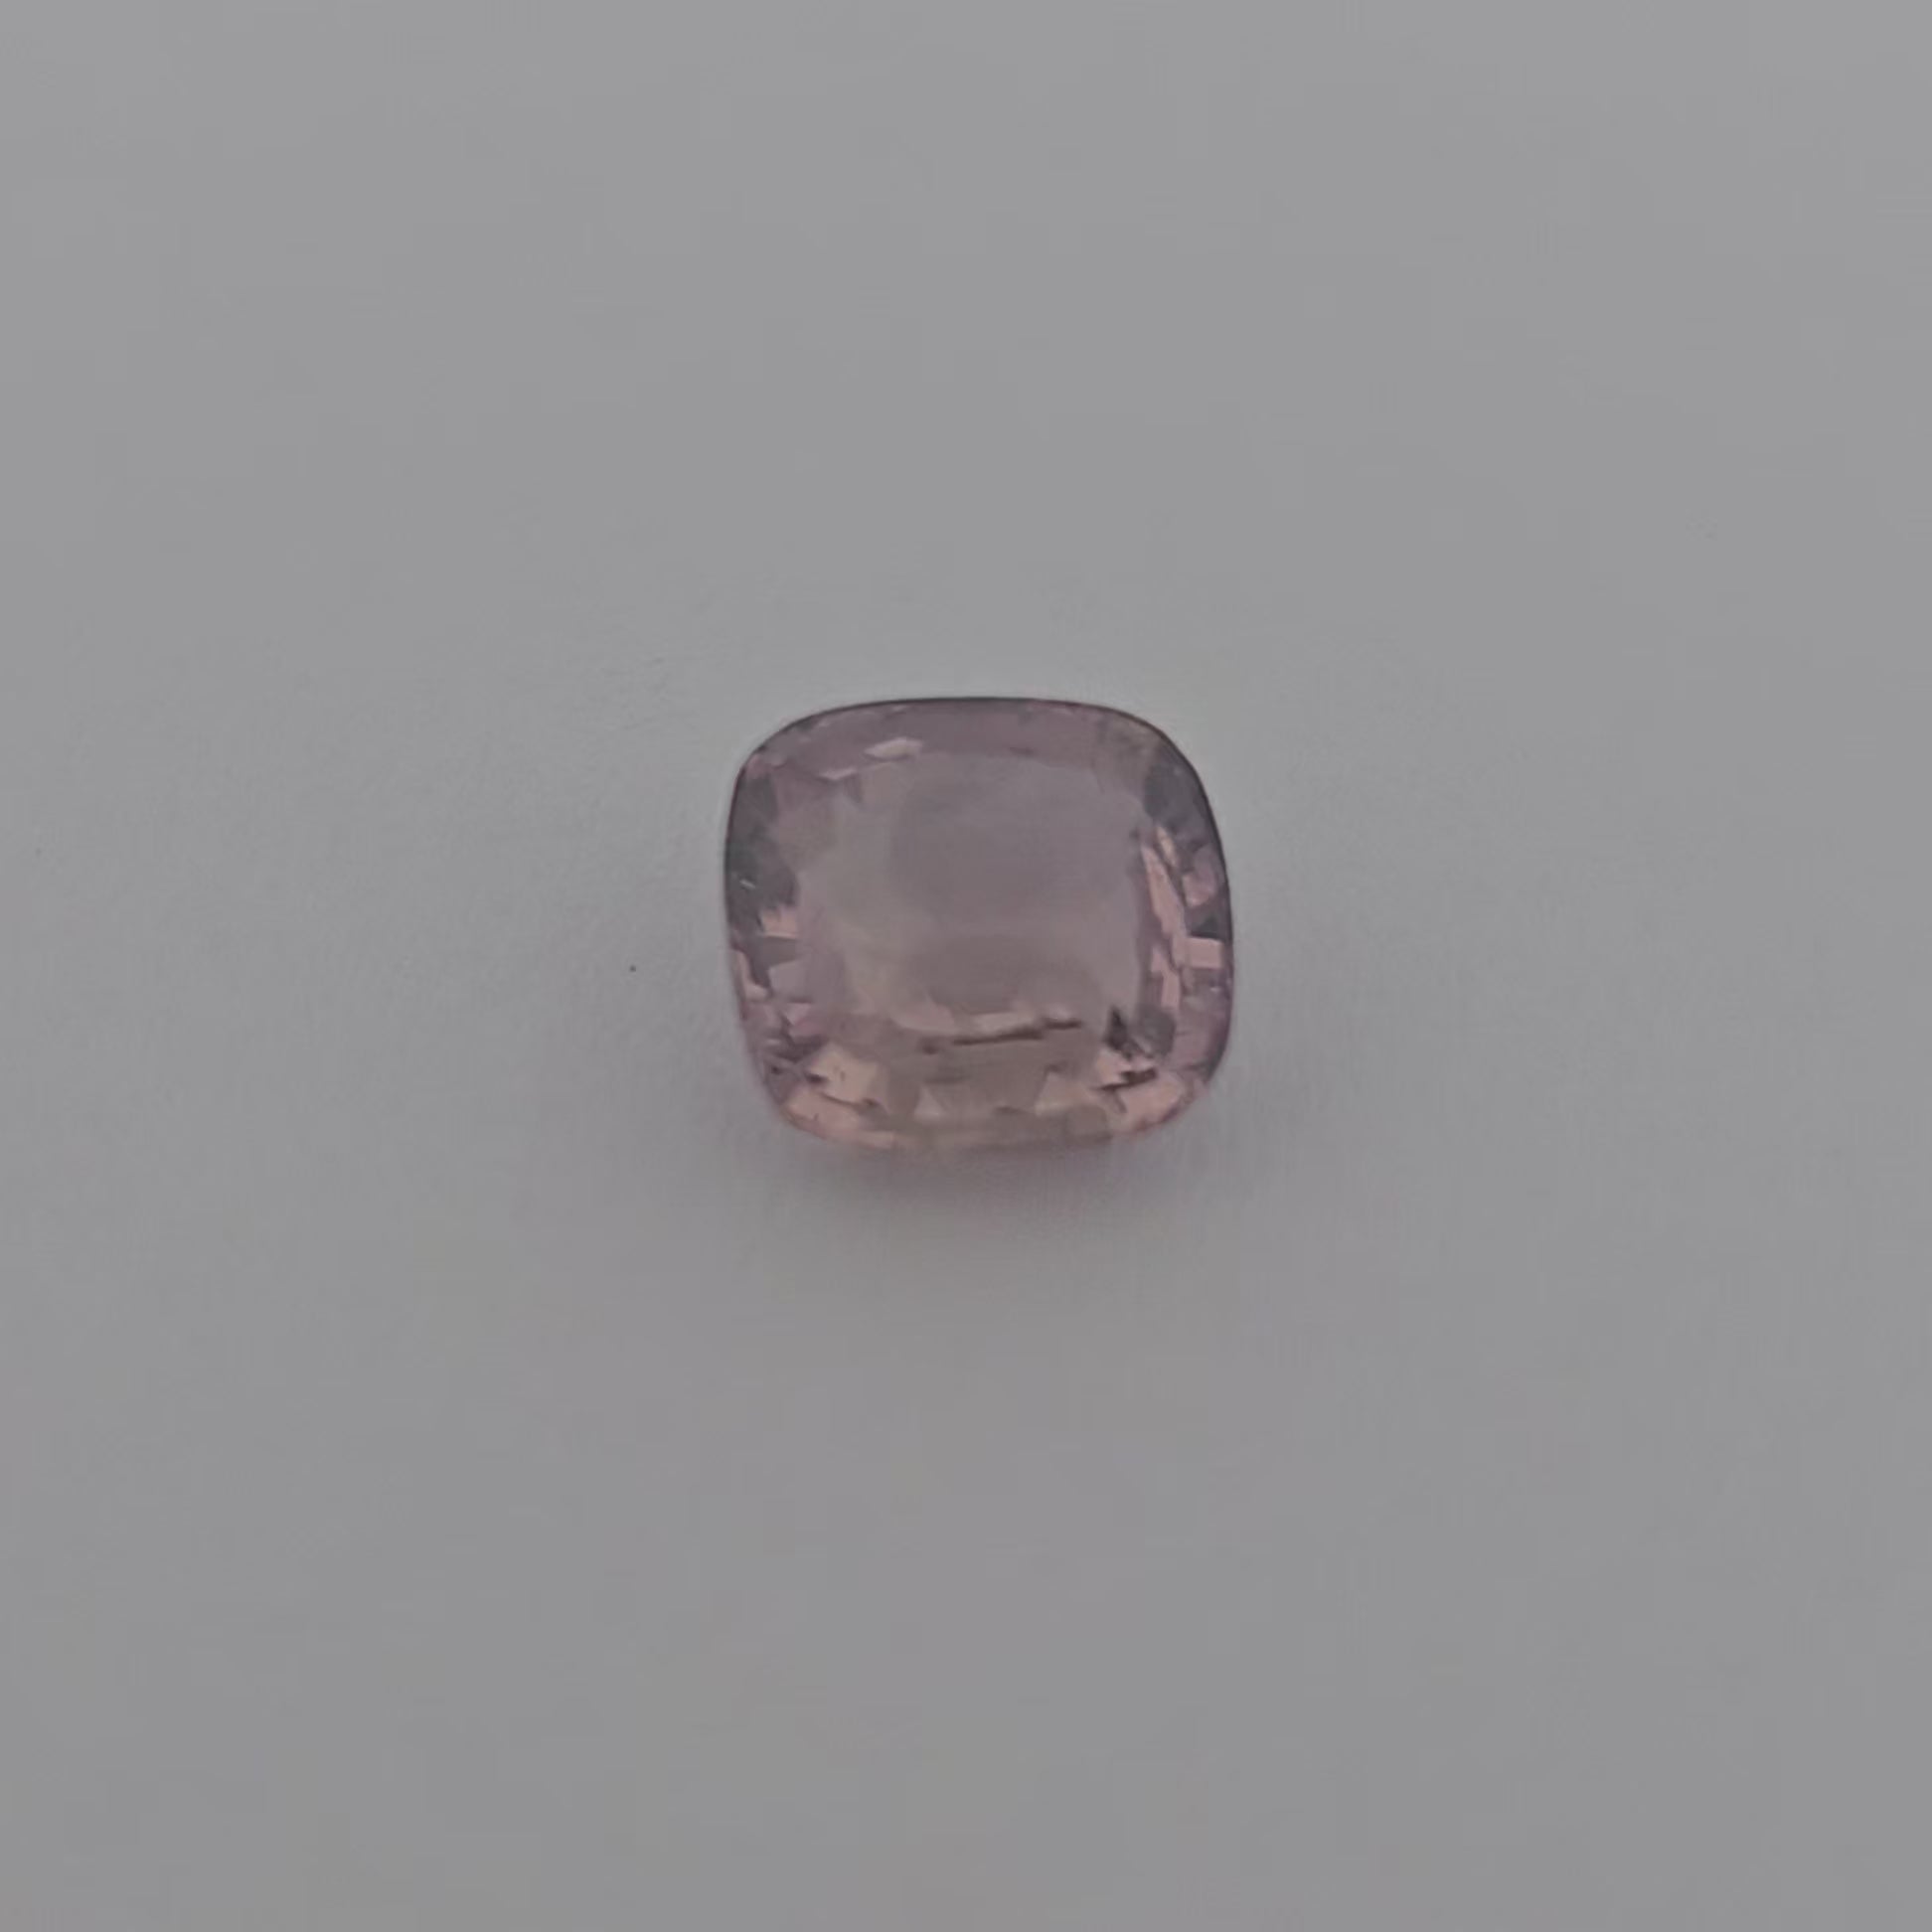 loose Natural Brown Sapphire Stone 1.61 Carats Cushion Brown 7 x 6.5 mm